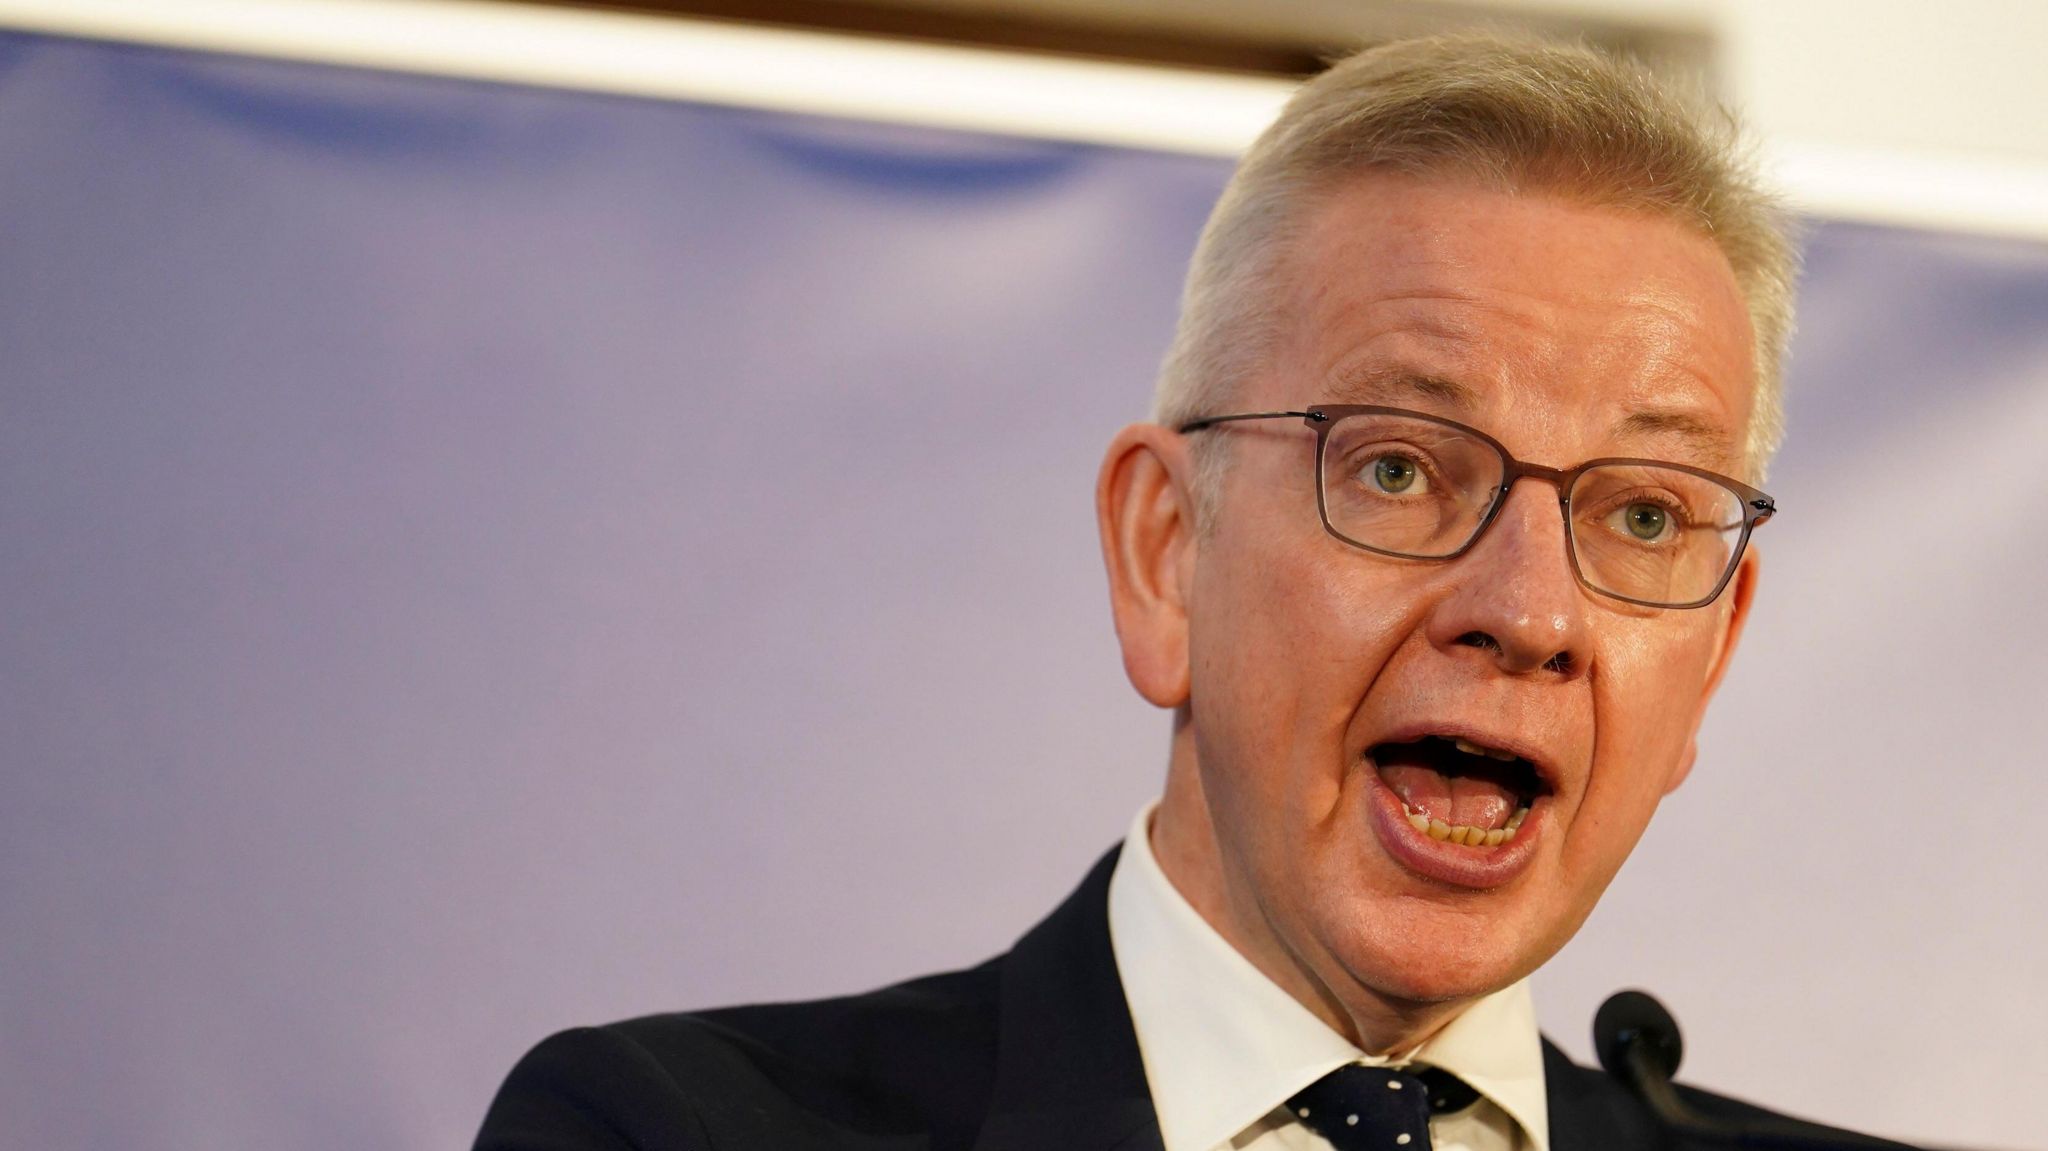 Levelling Up Secretary Michael Gove named seven councils who have not had a local plan for housing development for twenty years and has given them three months to come up with a timetable for one.